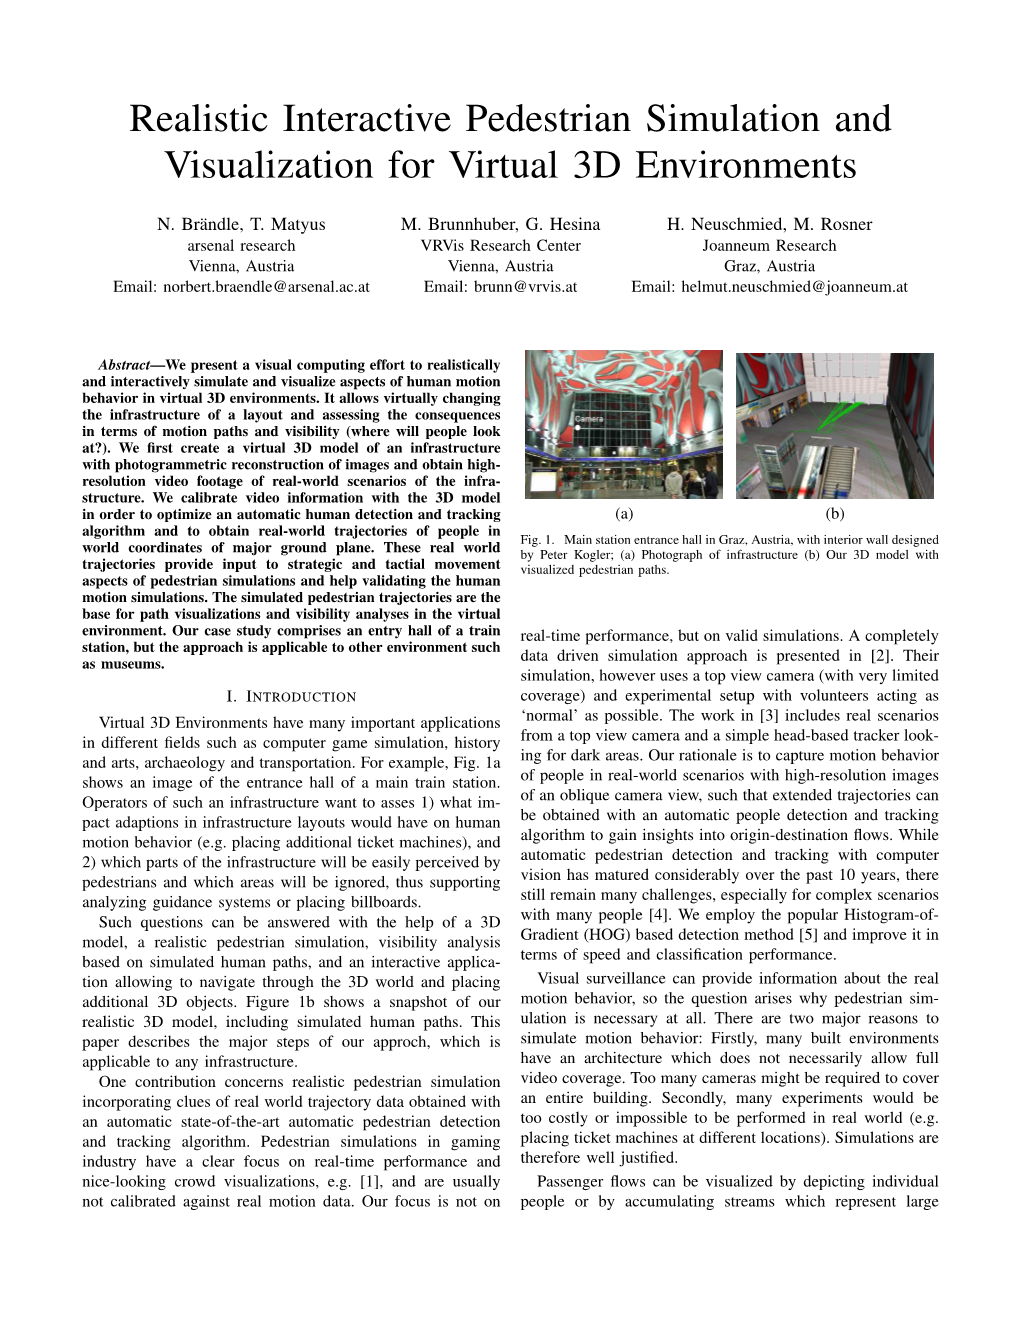 Realistic Interactive Pedestrian Simulation and Visualization for Virtual 3D Environments